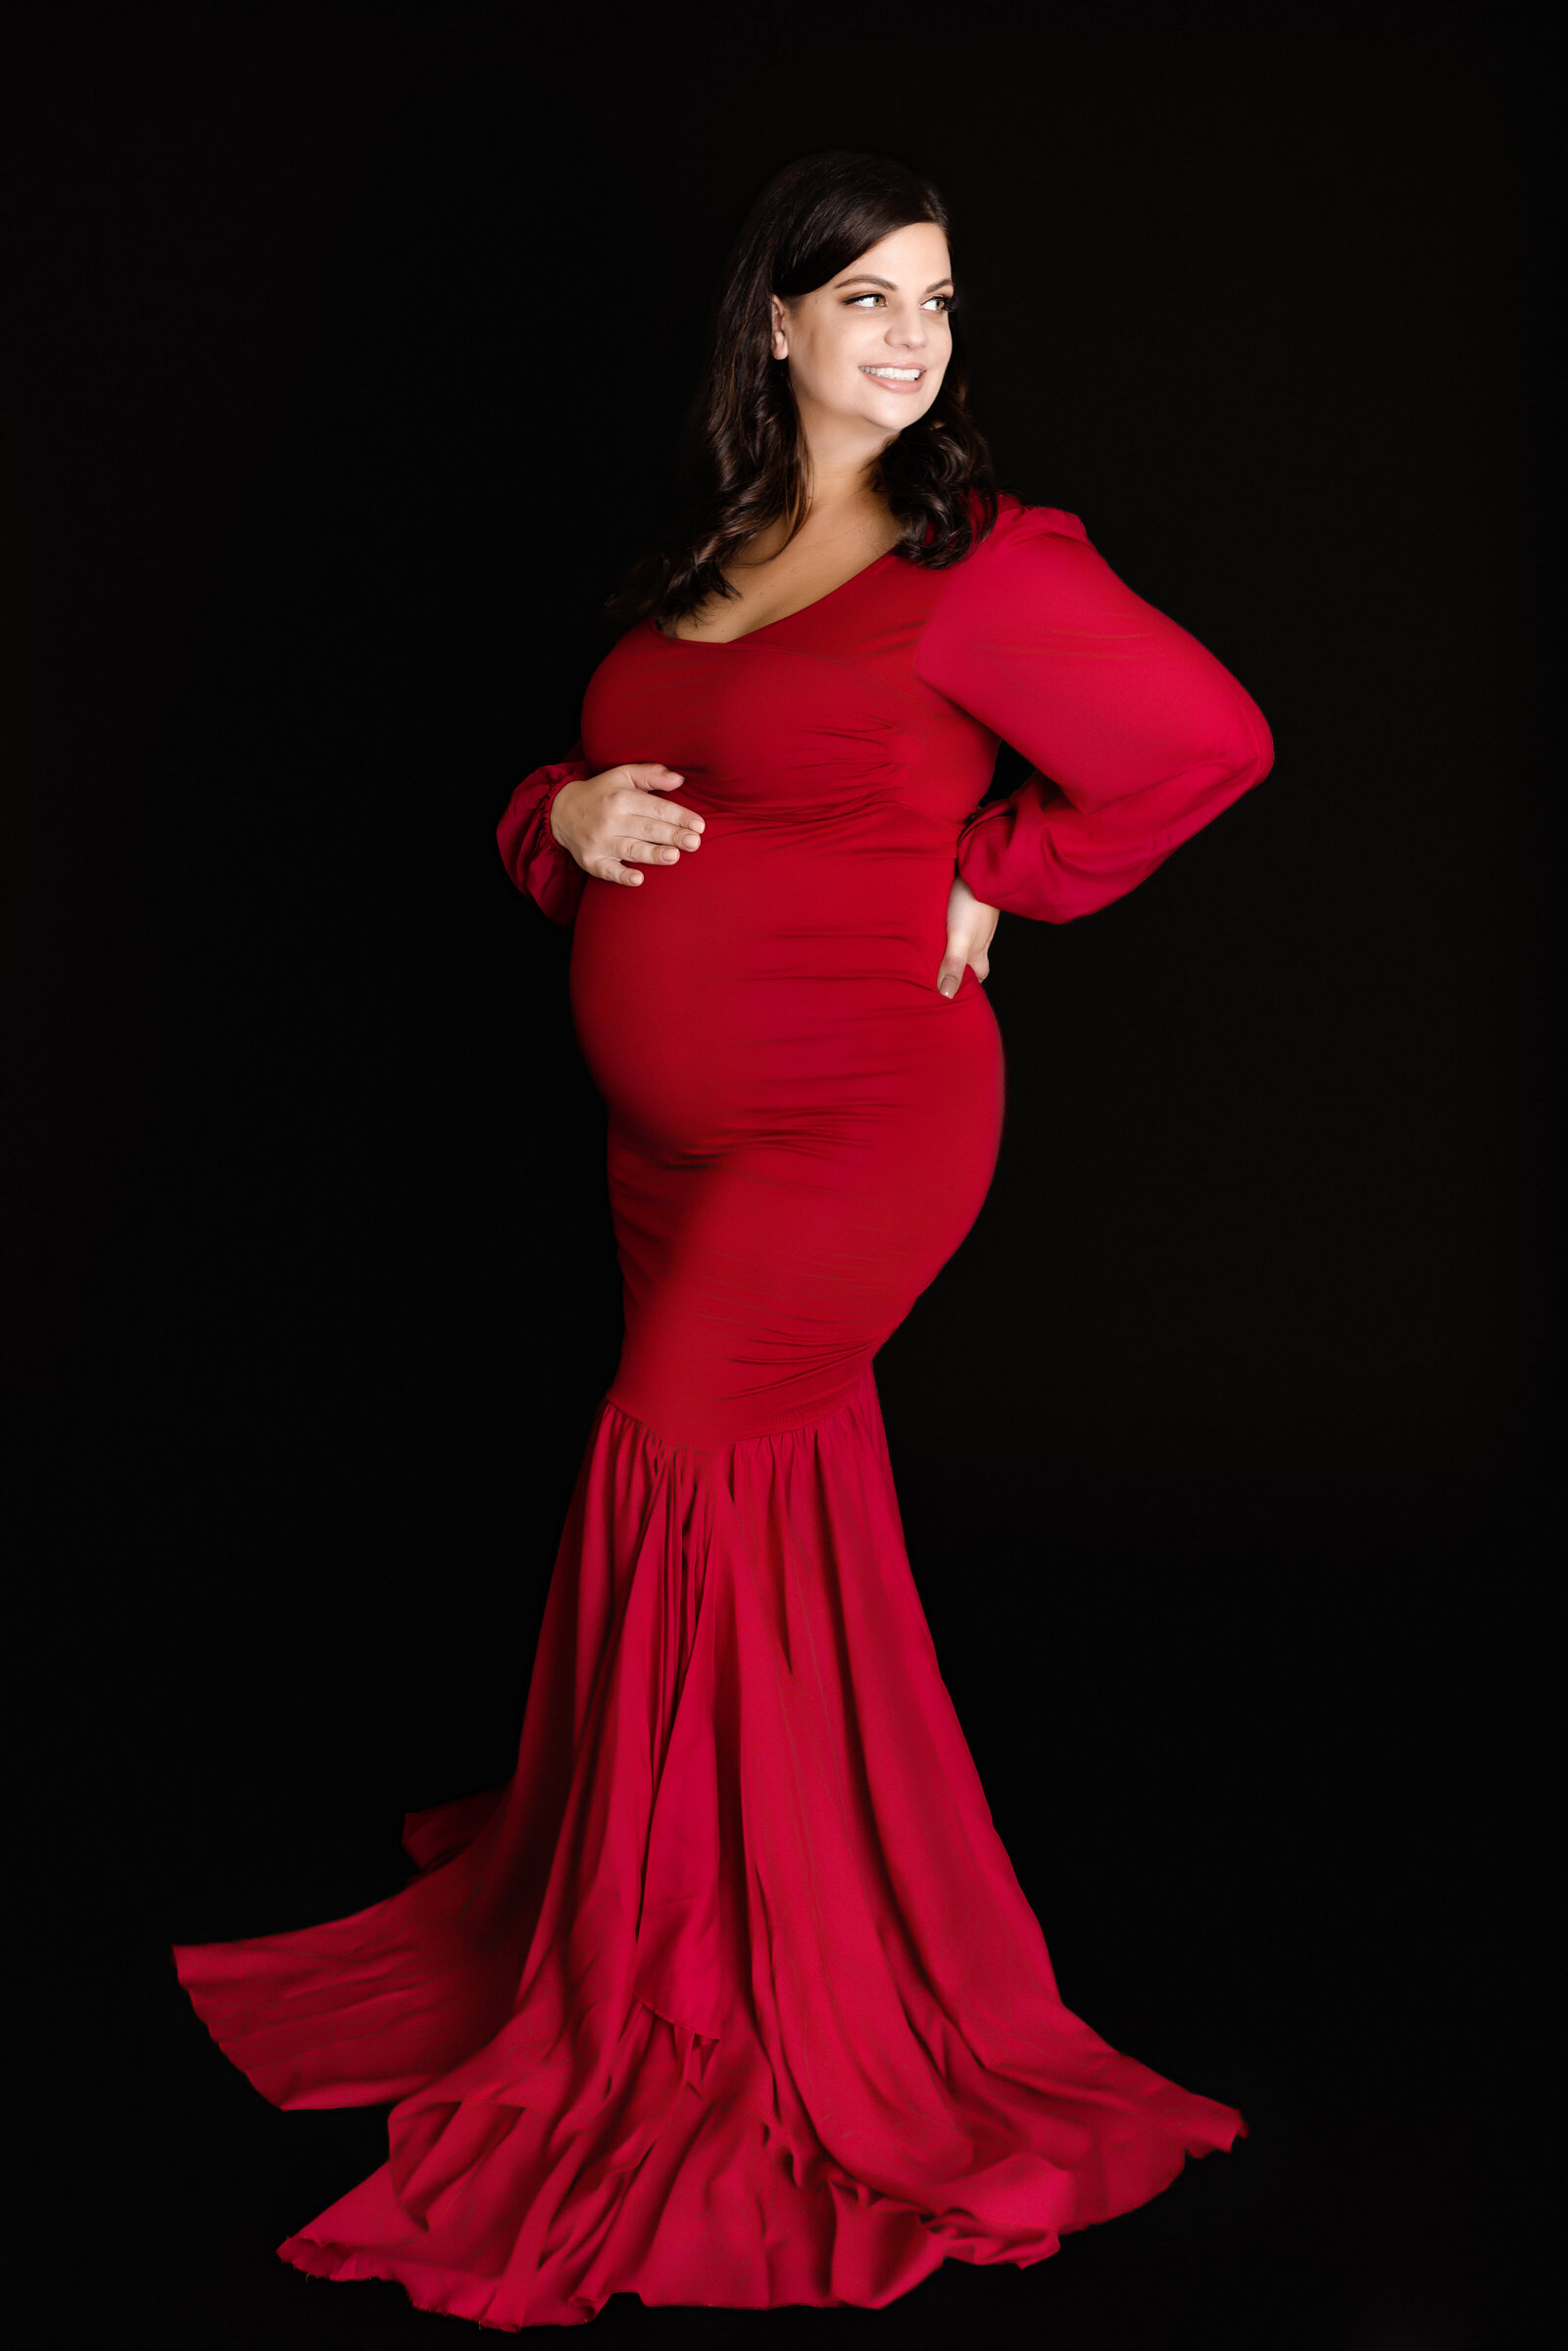 Maternity Photographer, a happy mother-to-be wears a red maternity photographer